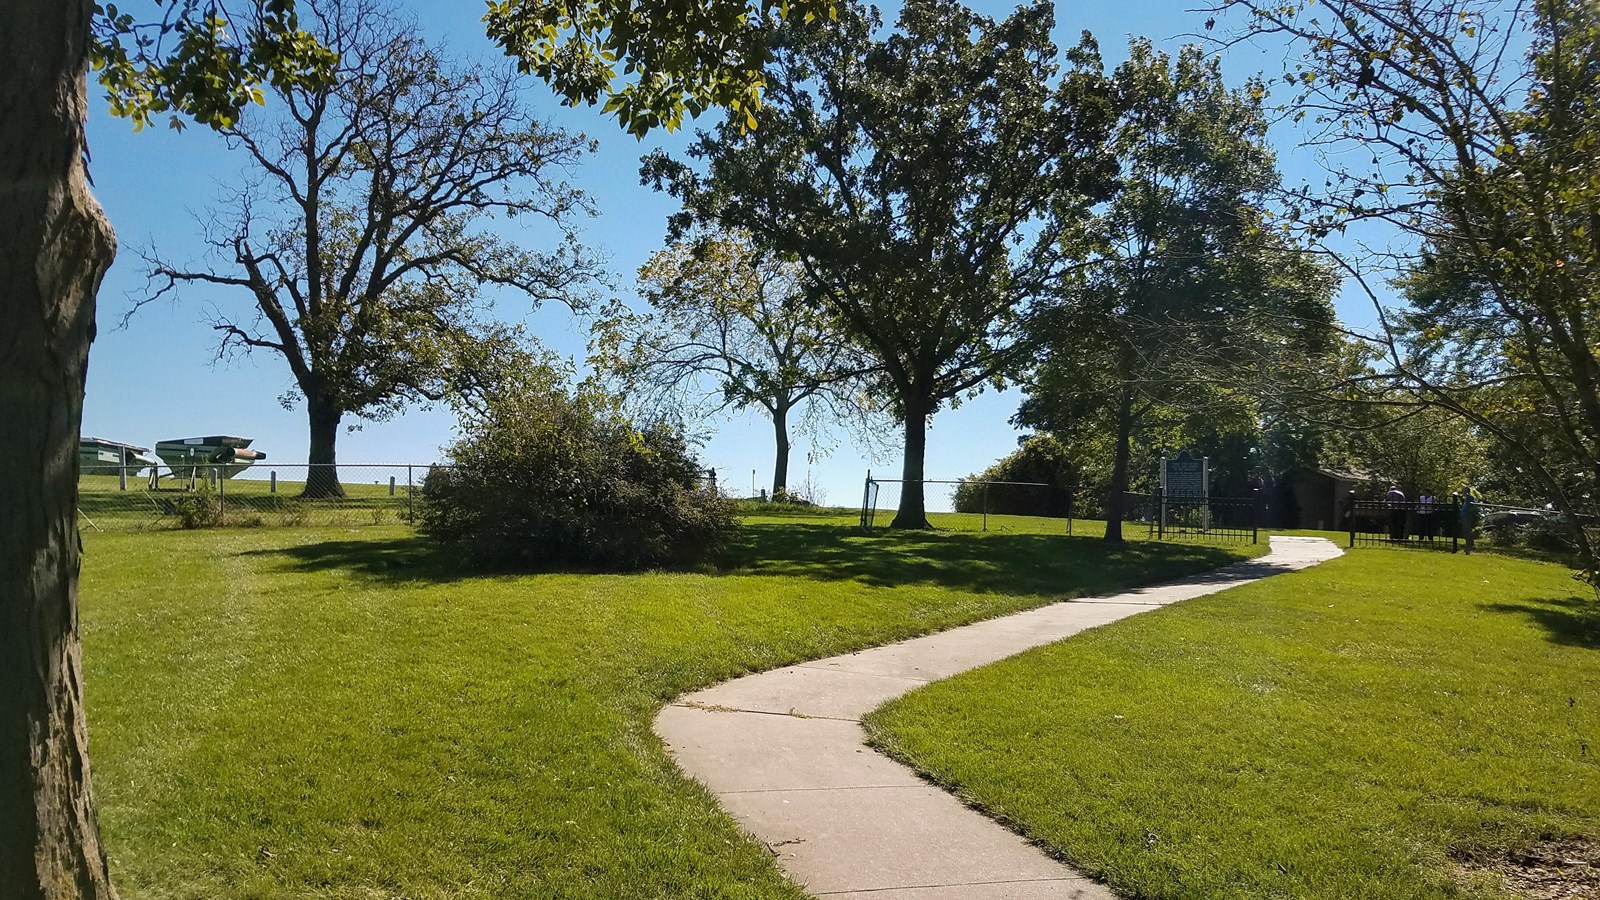 A winding path leads through a grassy park. 